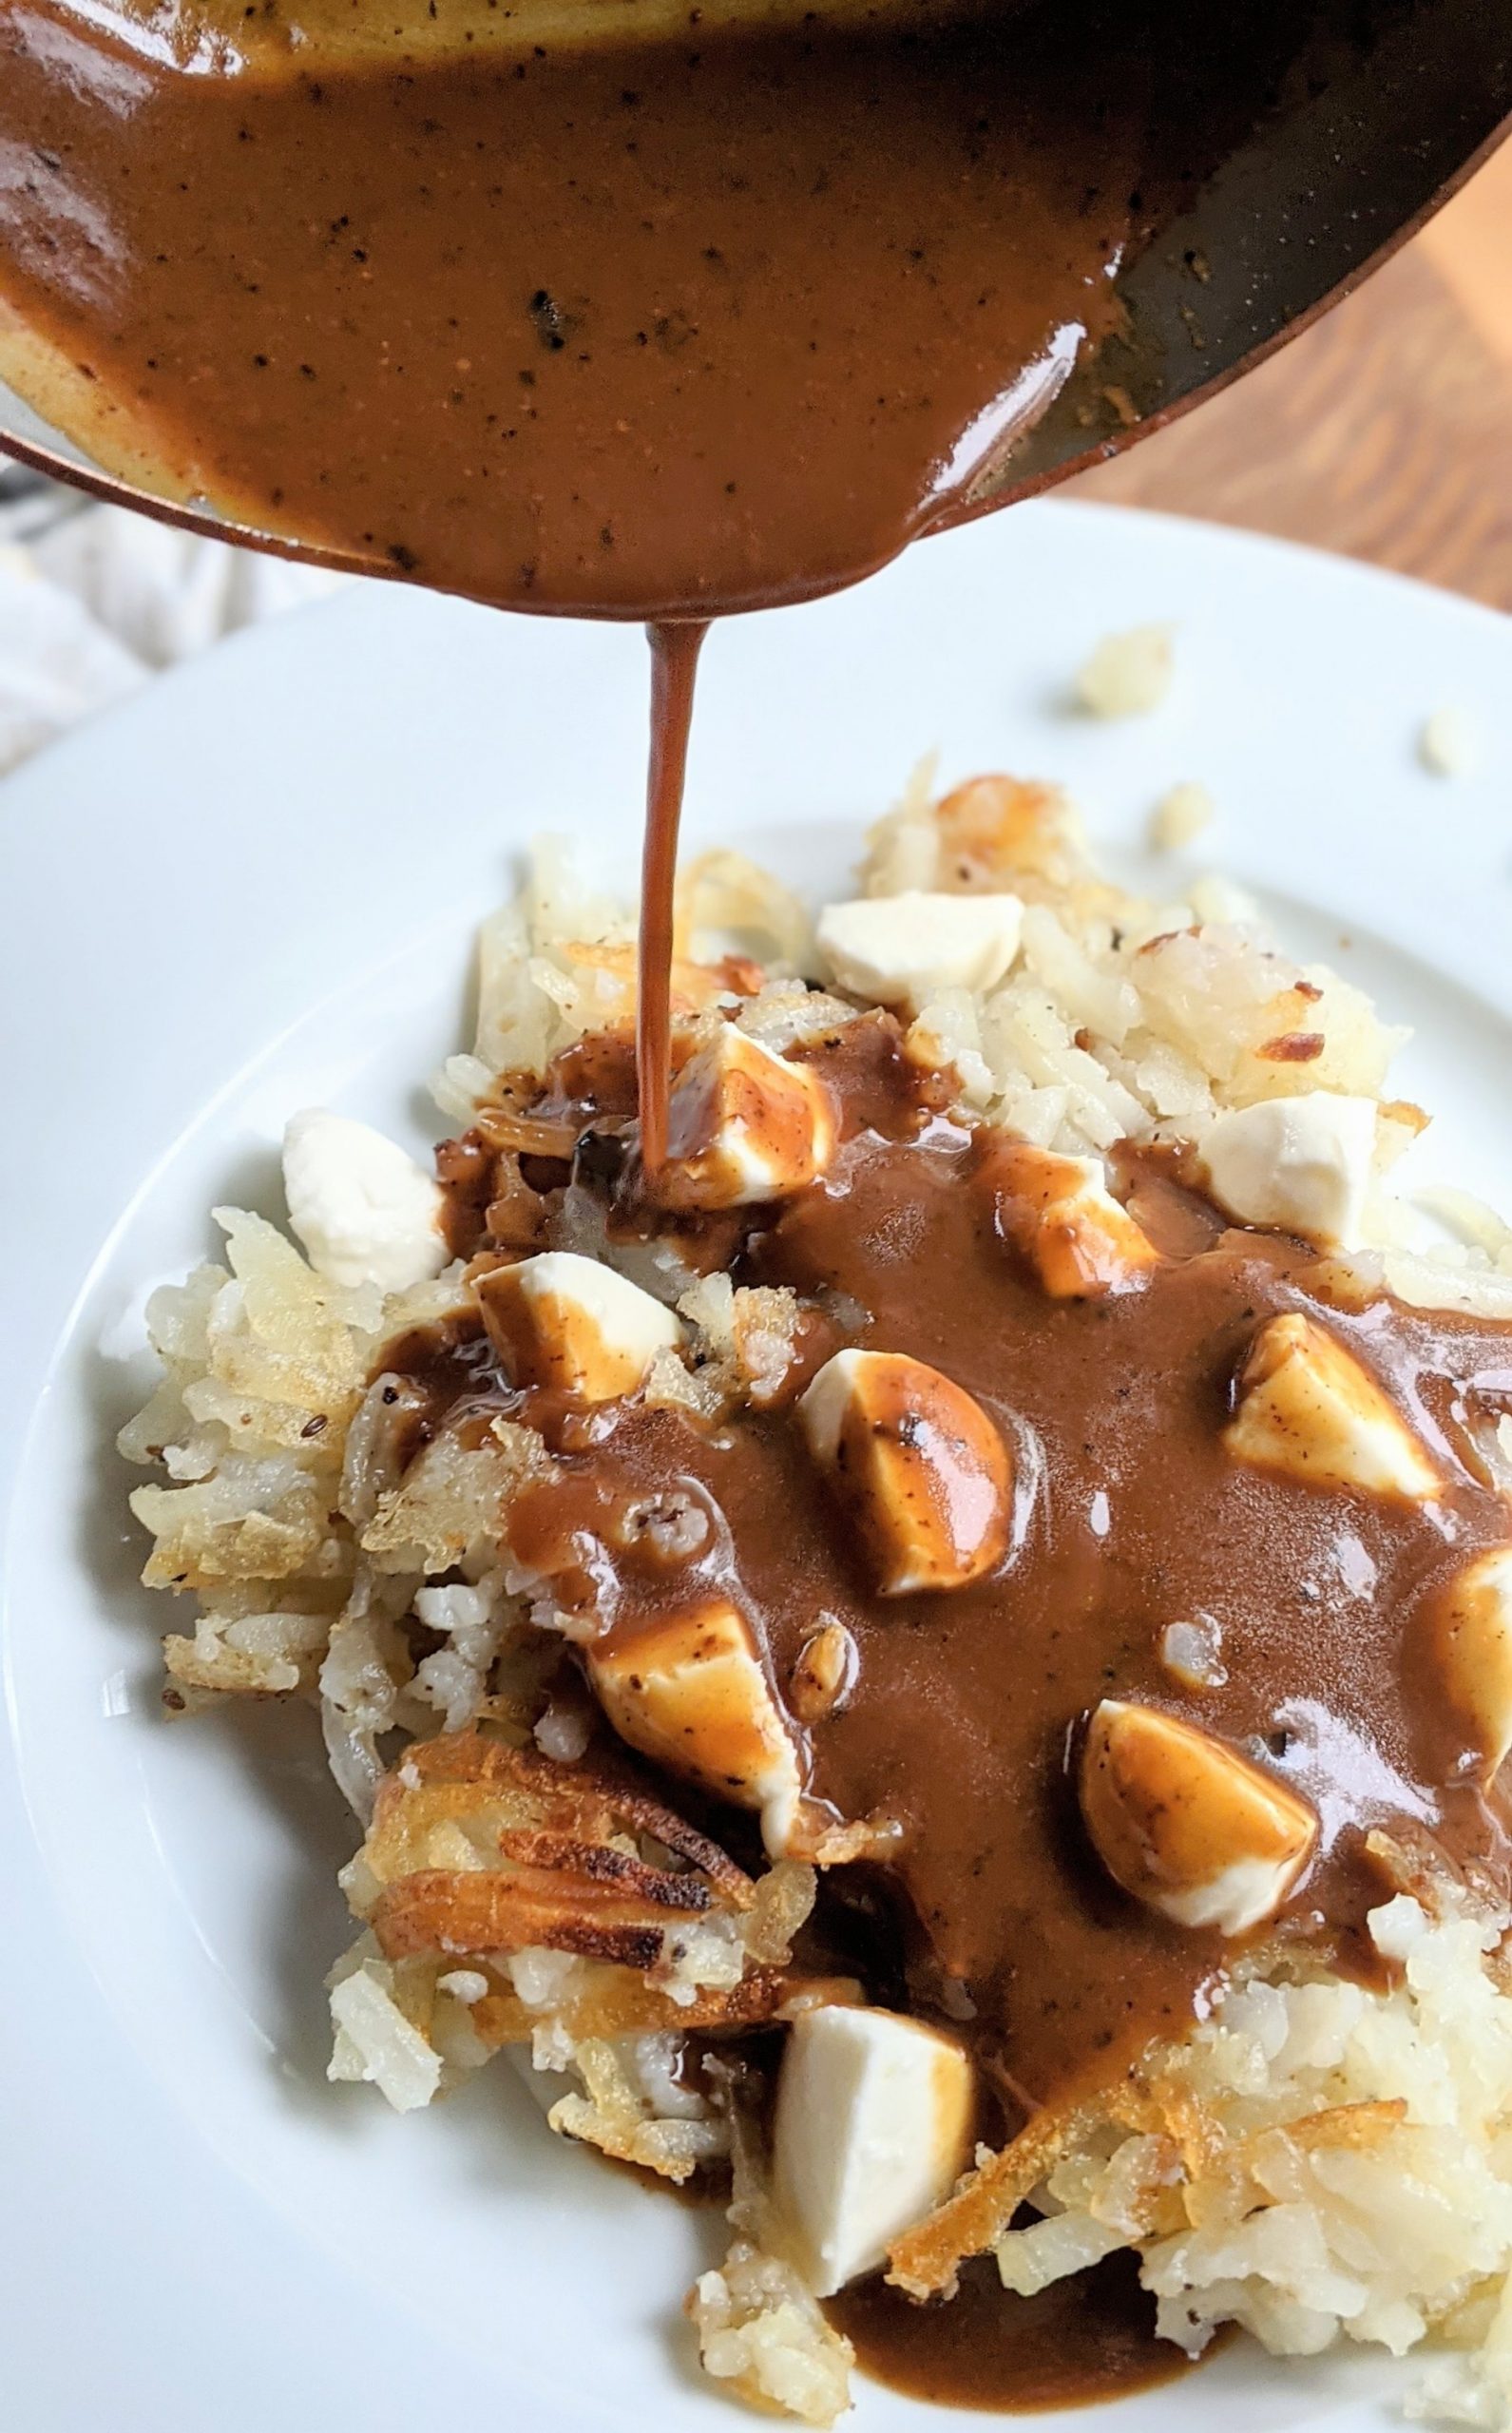 poutine with hash browns recipe fun hash browns and gravy recipe with cheese curds potatoes cheese and gravy for breakfast recipes can i eat poutine for breakfast